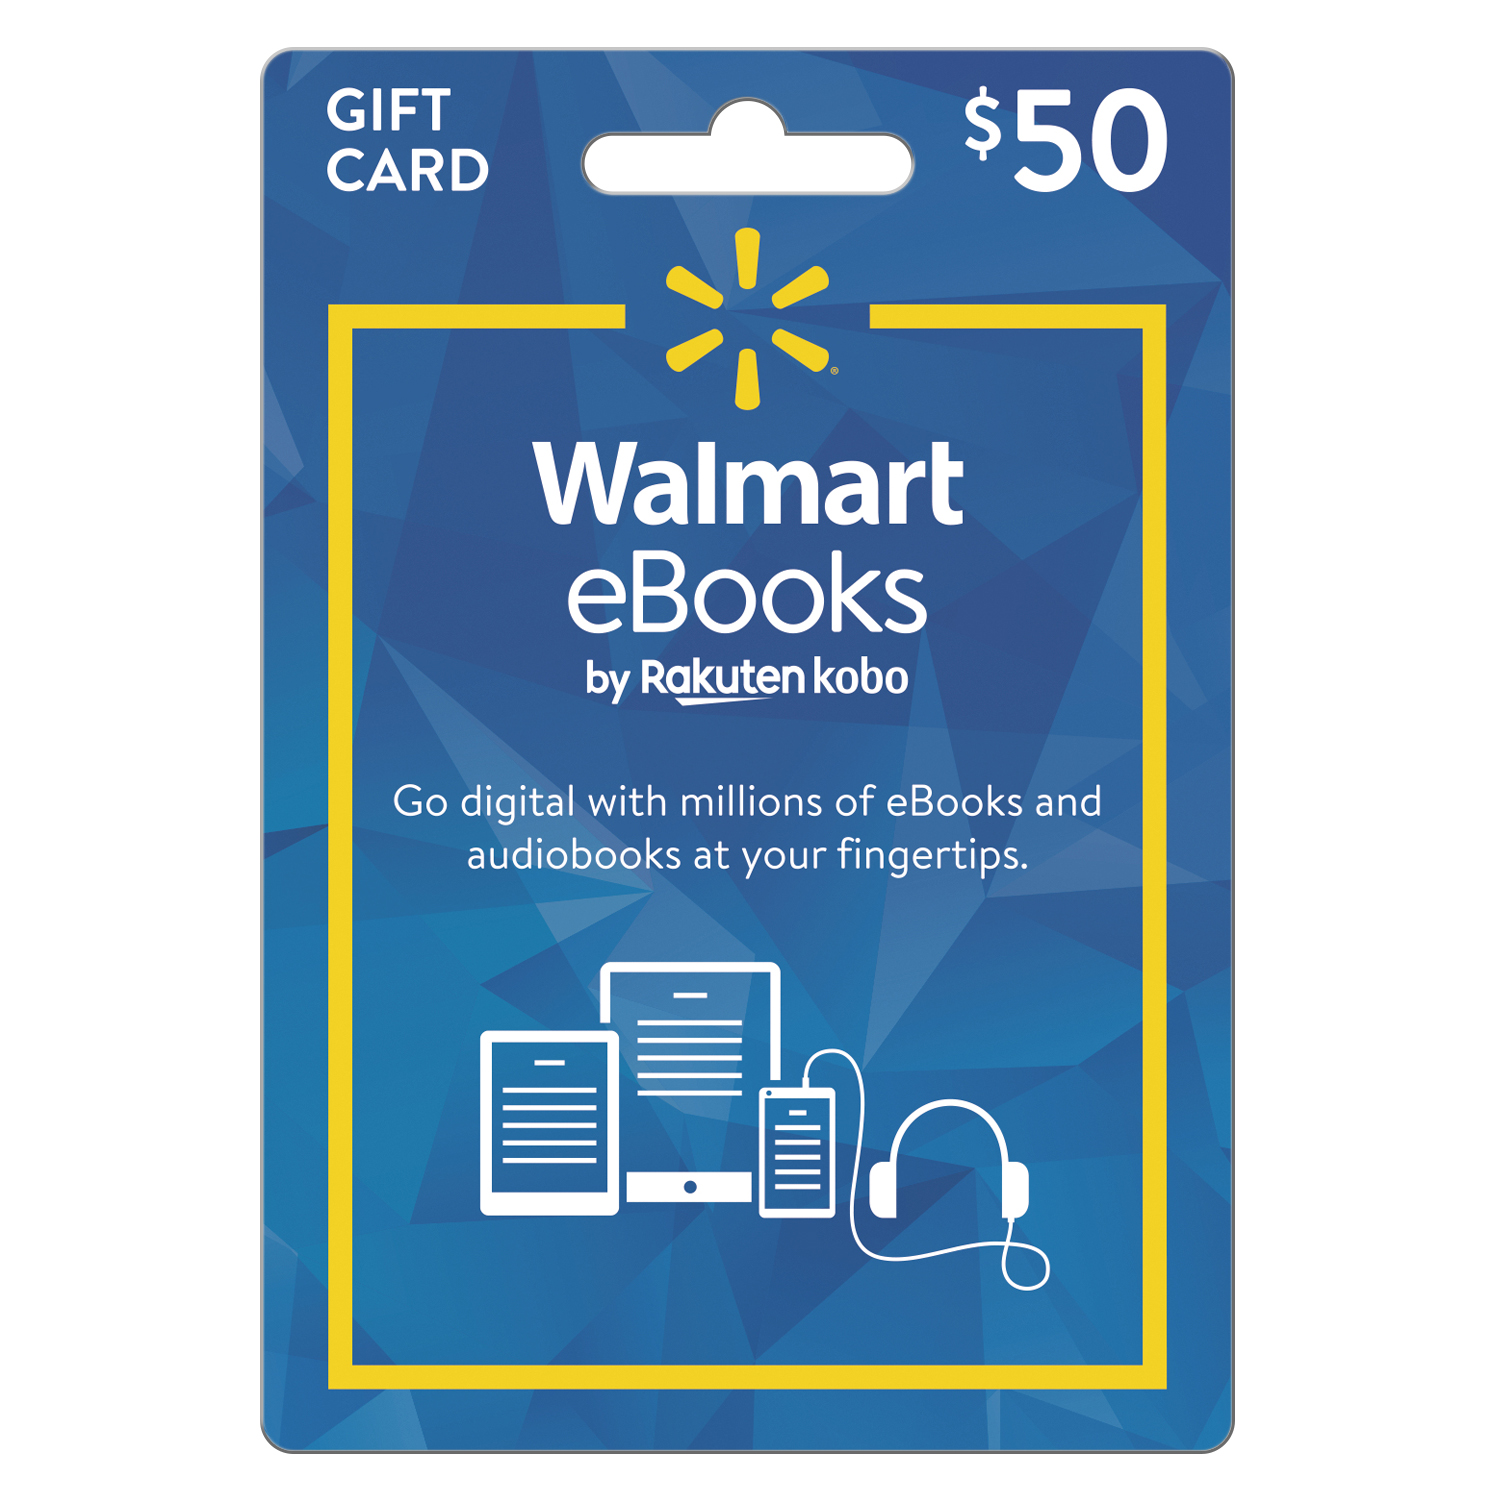 Walmart eBooks eGift Card $50 (email delivery) - image 1 of 2